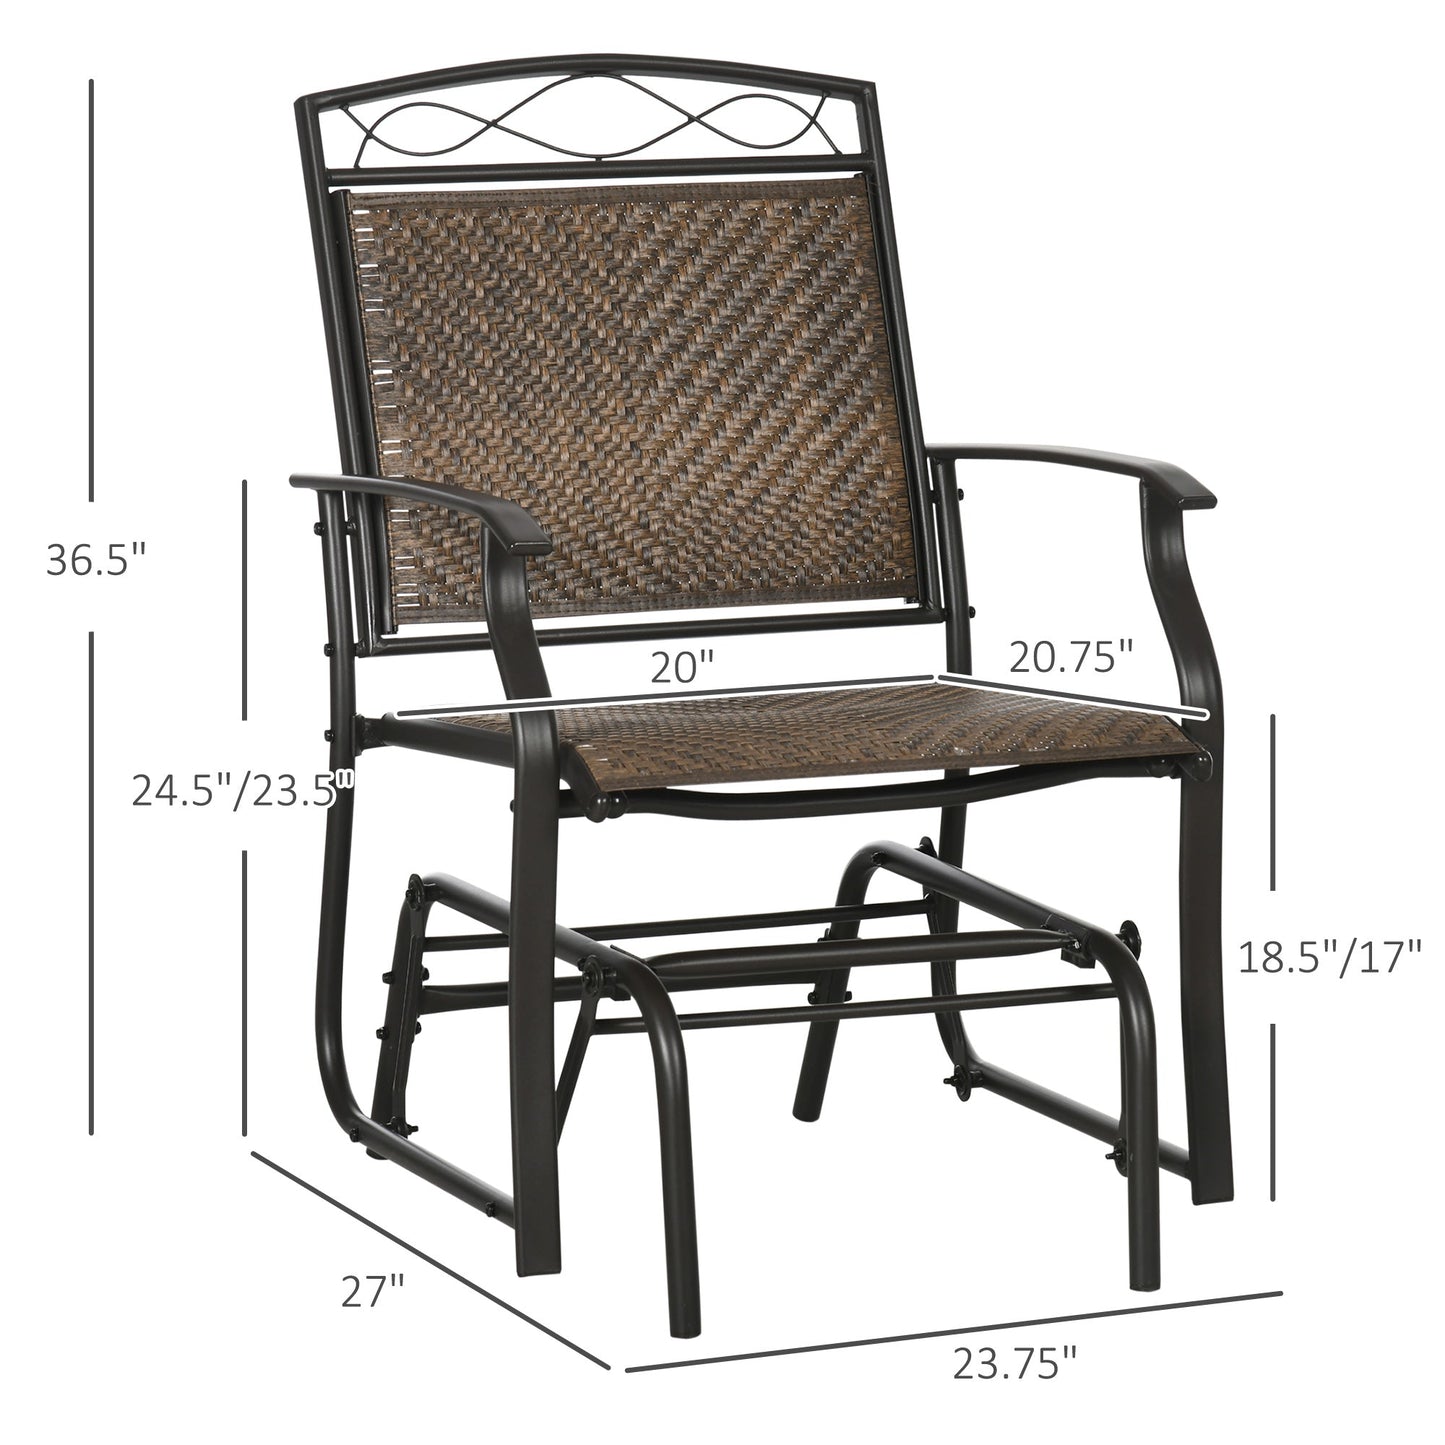 Outdoor and Garden-Set of 2 Outdoor Glider Chairs, Porch & Patio Rockers for Deck with PE Rattan Seats, Steel Frames for Garden, Backyard, Poolside, Brown - Outdoor Style Company